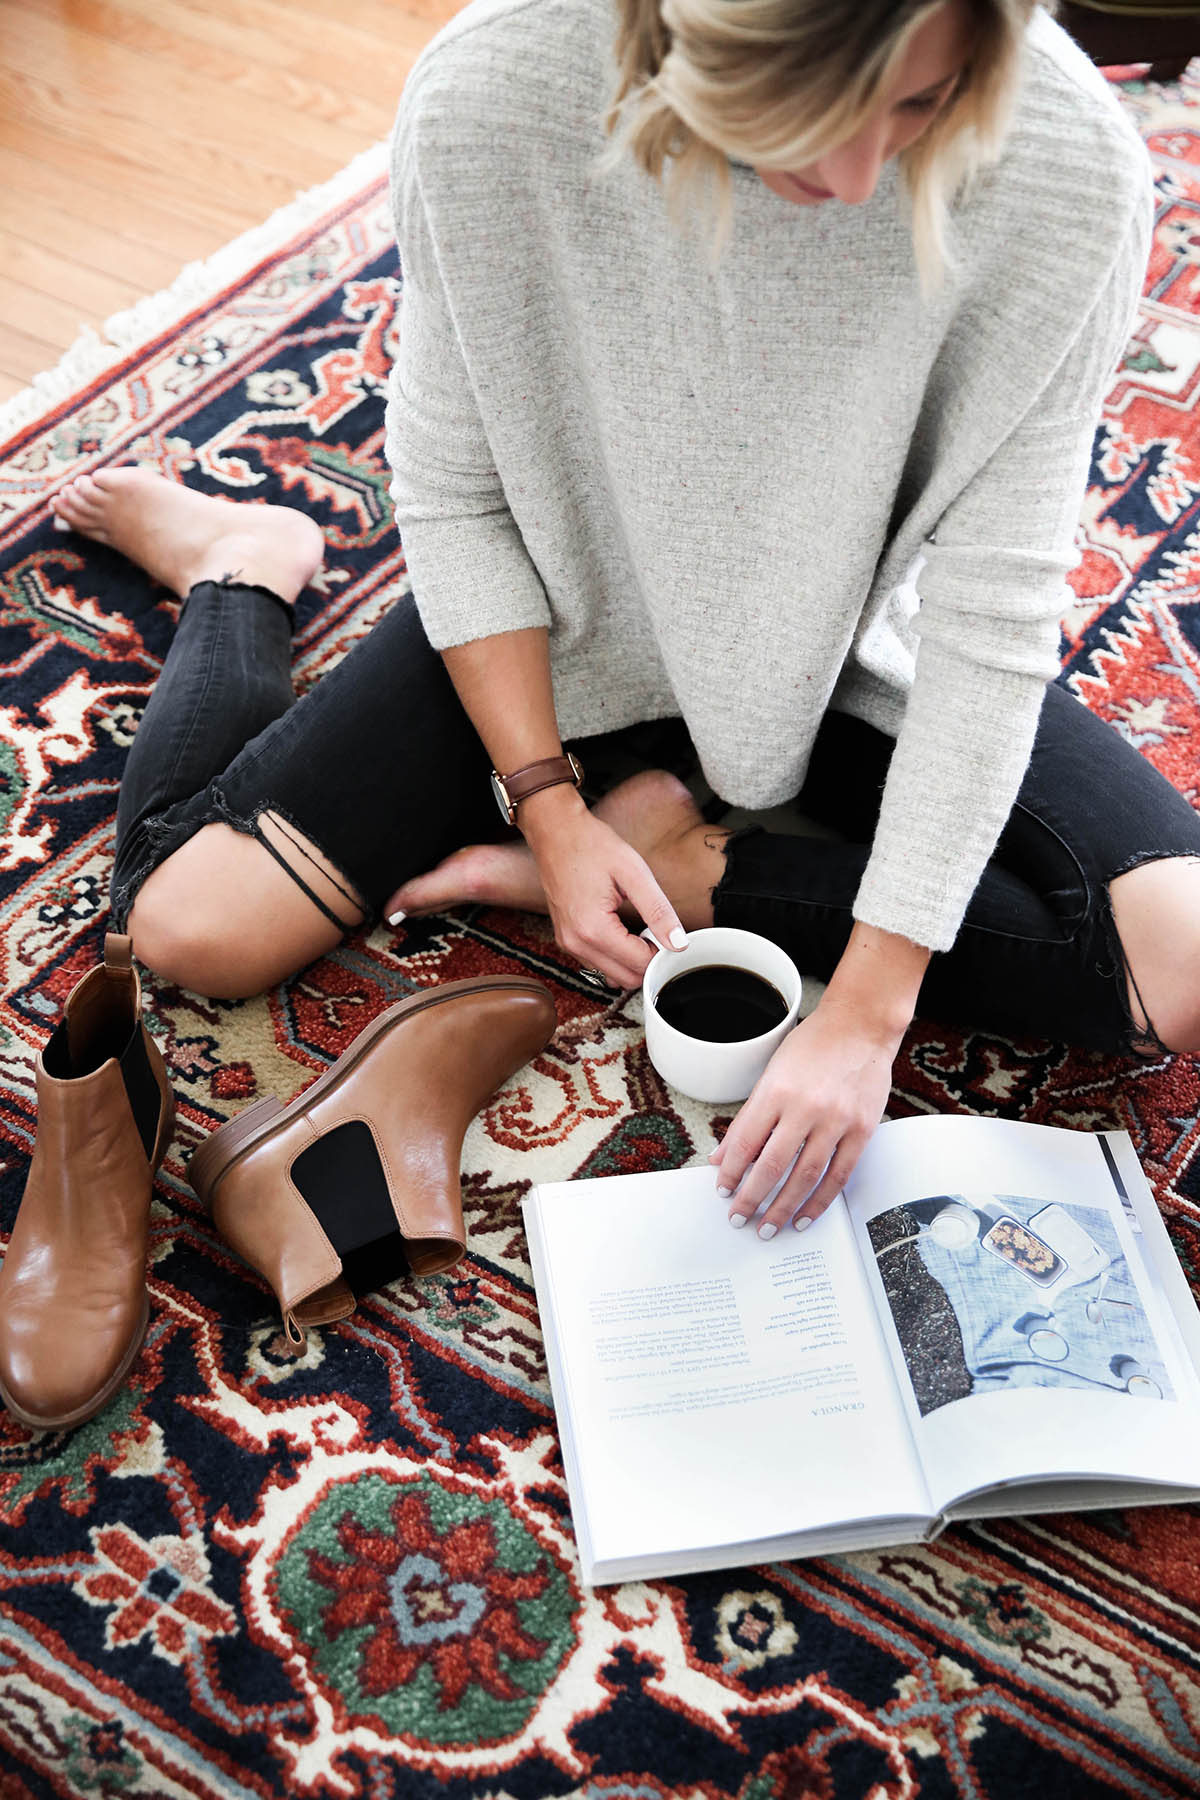 free people arctic fox sweater with chelsea boots and black distressed skinny jeans on antique rug